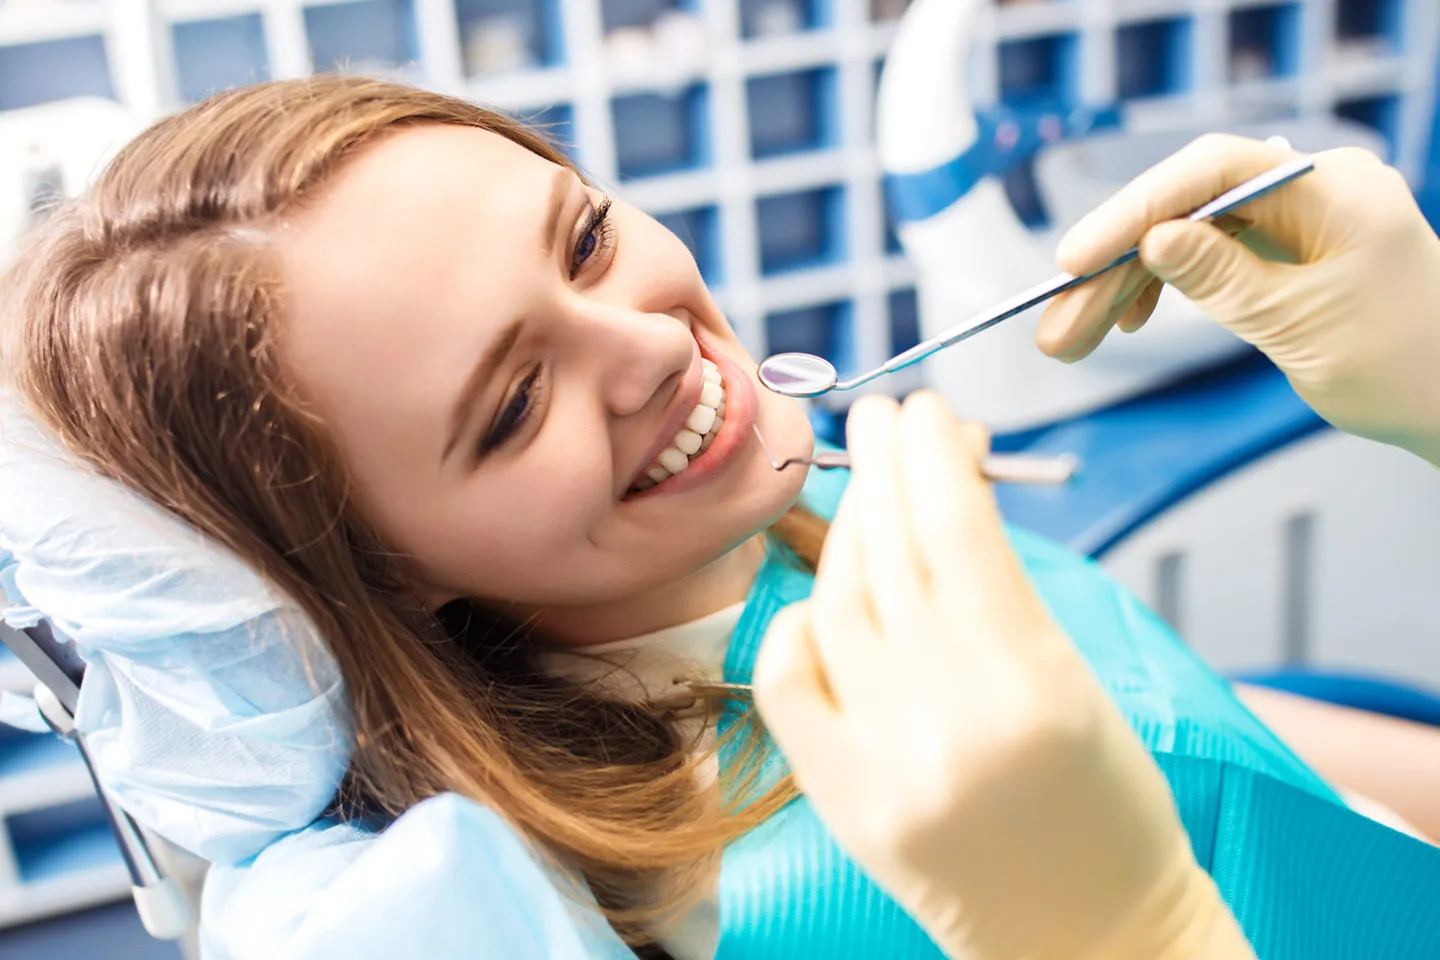 Demystifying Common Misconceptions About Oral Health and Dentistry